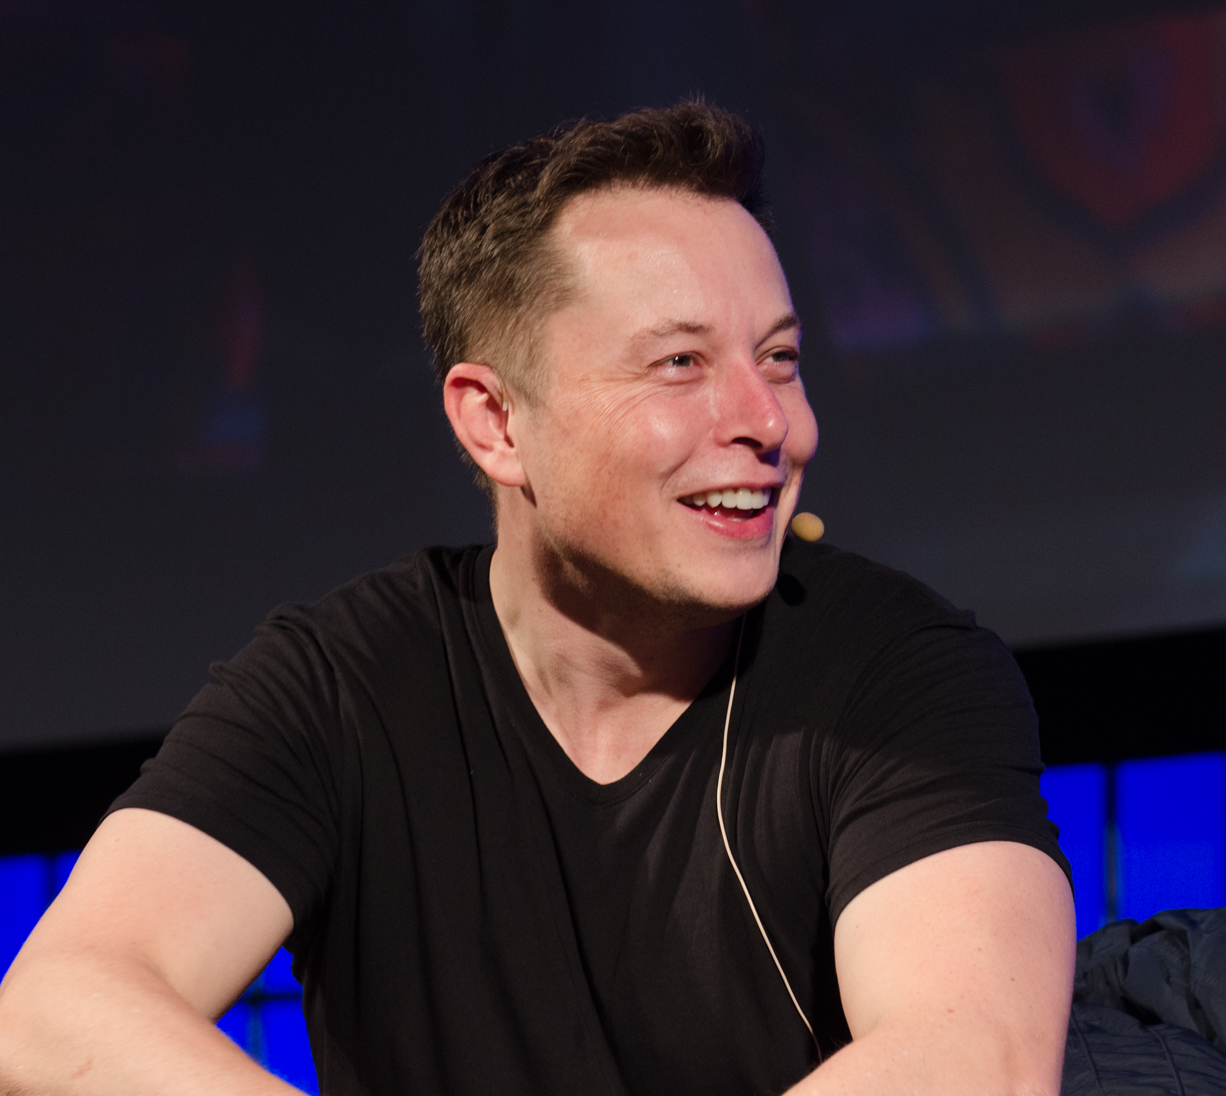 Elon Musk has this skill in bunches, which is why he’s so successful at so many things. Credit: Dan Taylor, Heisenberg Media; Wikipedia Commons